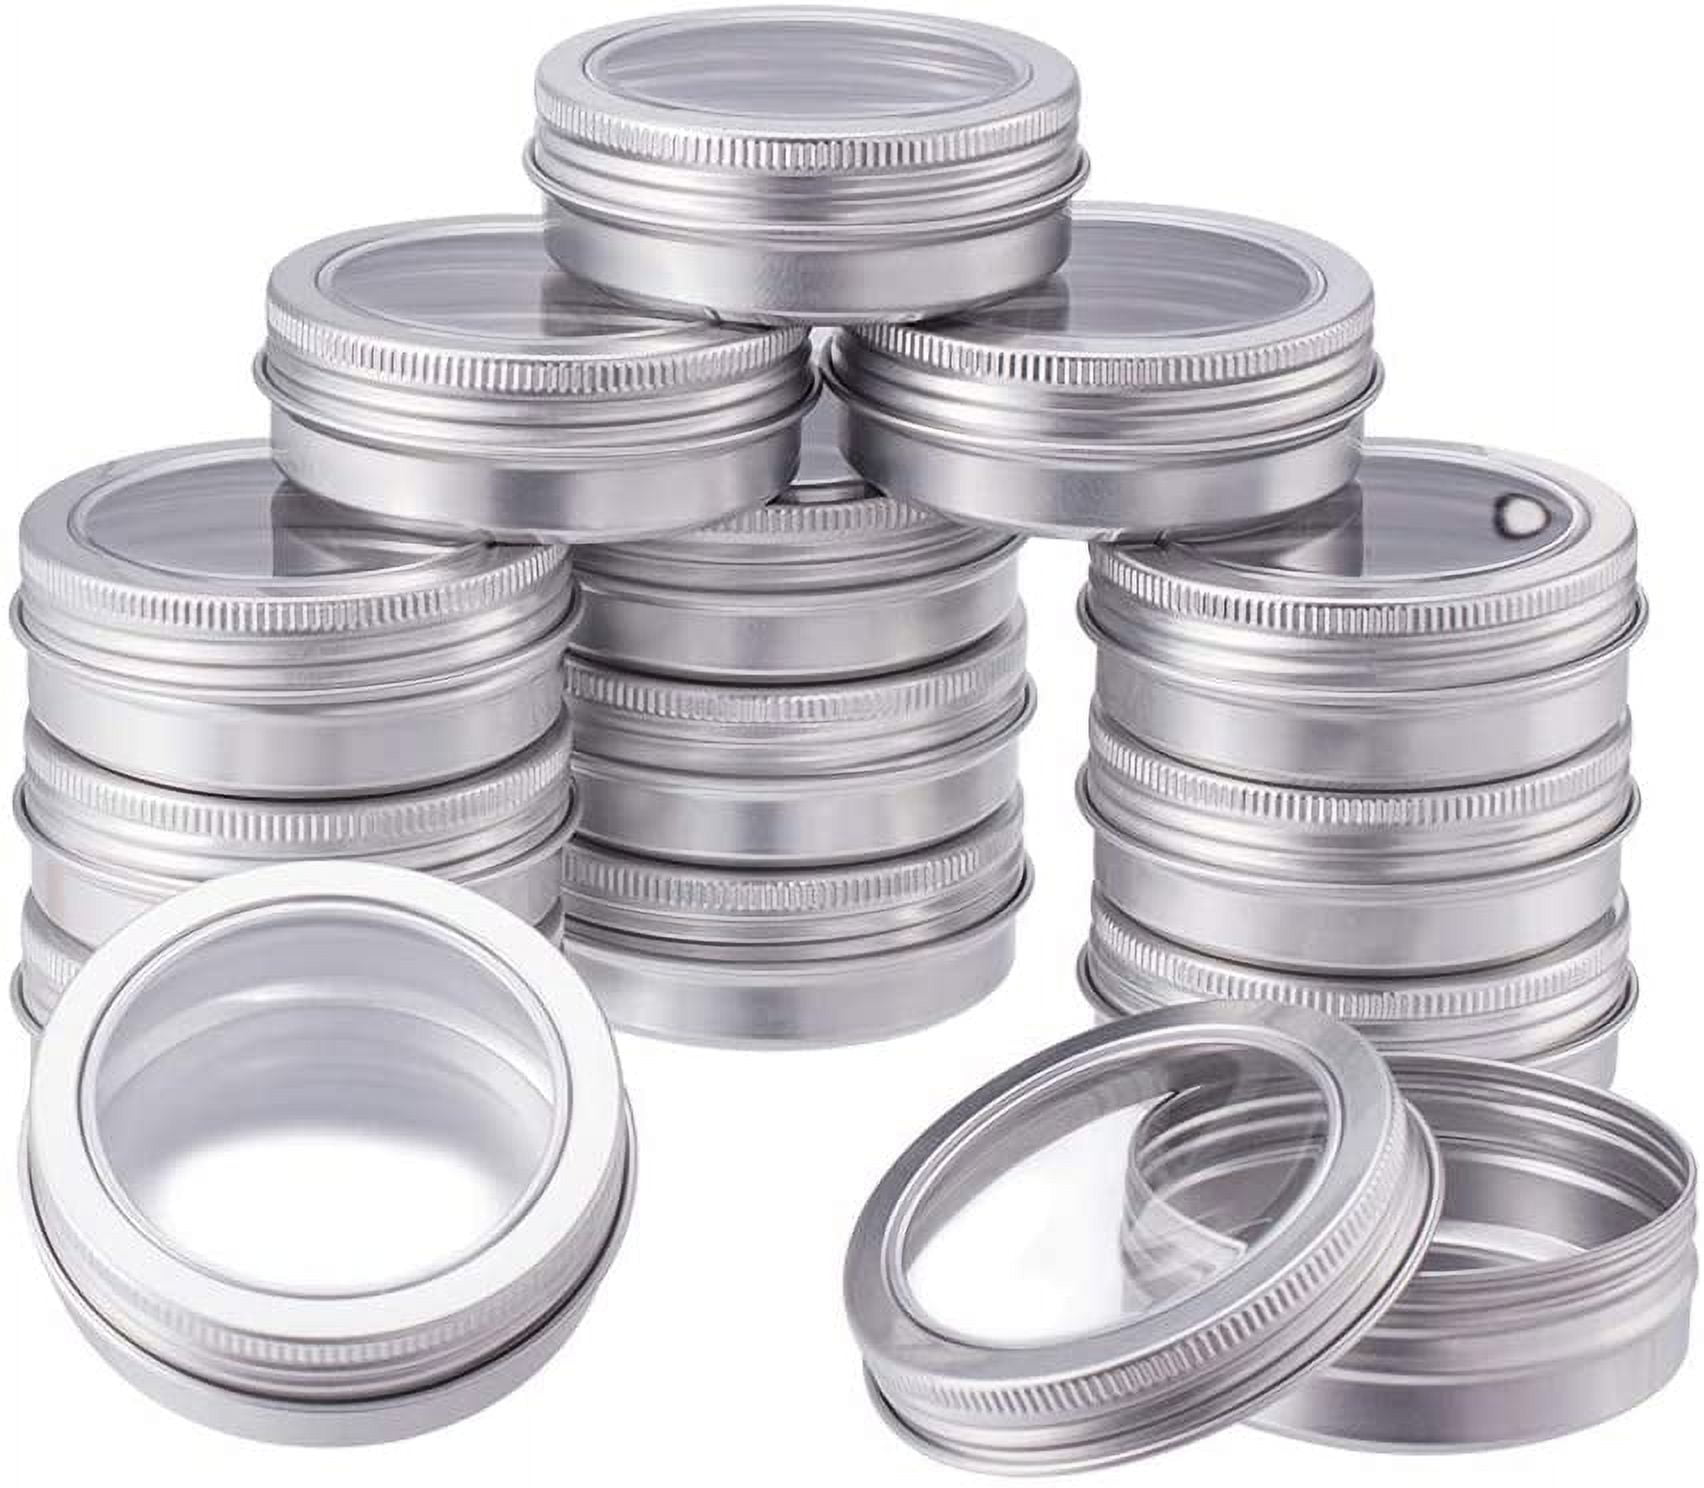 Uxcell 4.4oz Screw Top Lid Round Cans Tin Containers Aluminum Silver Tone 1  Pack